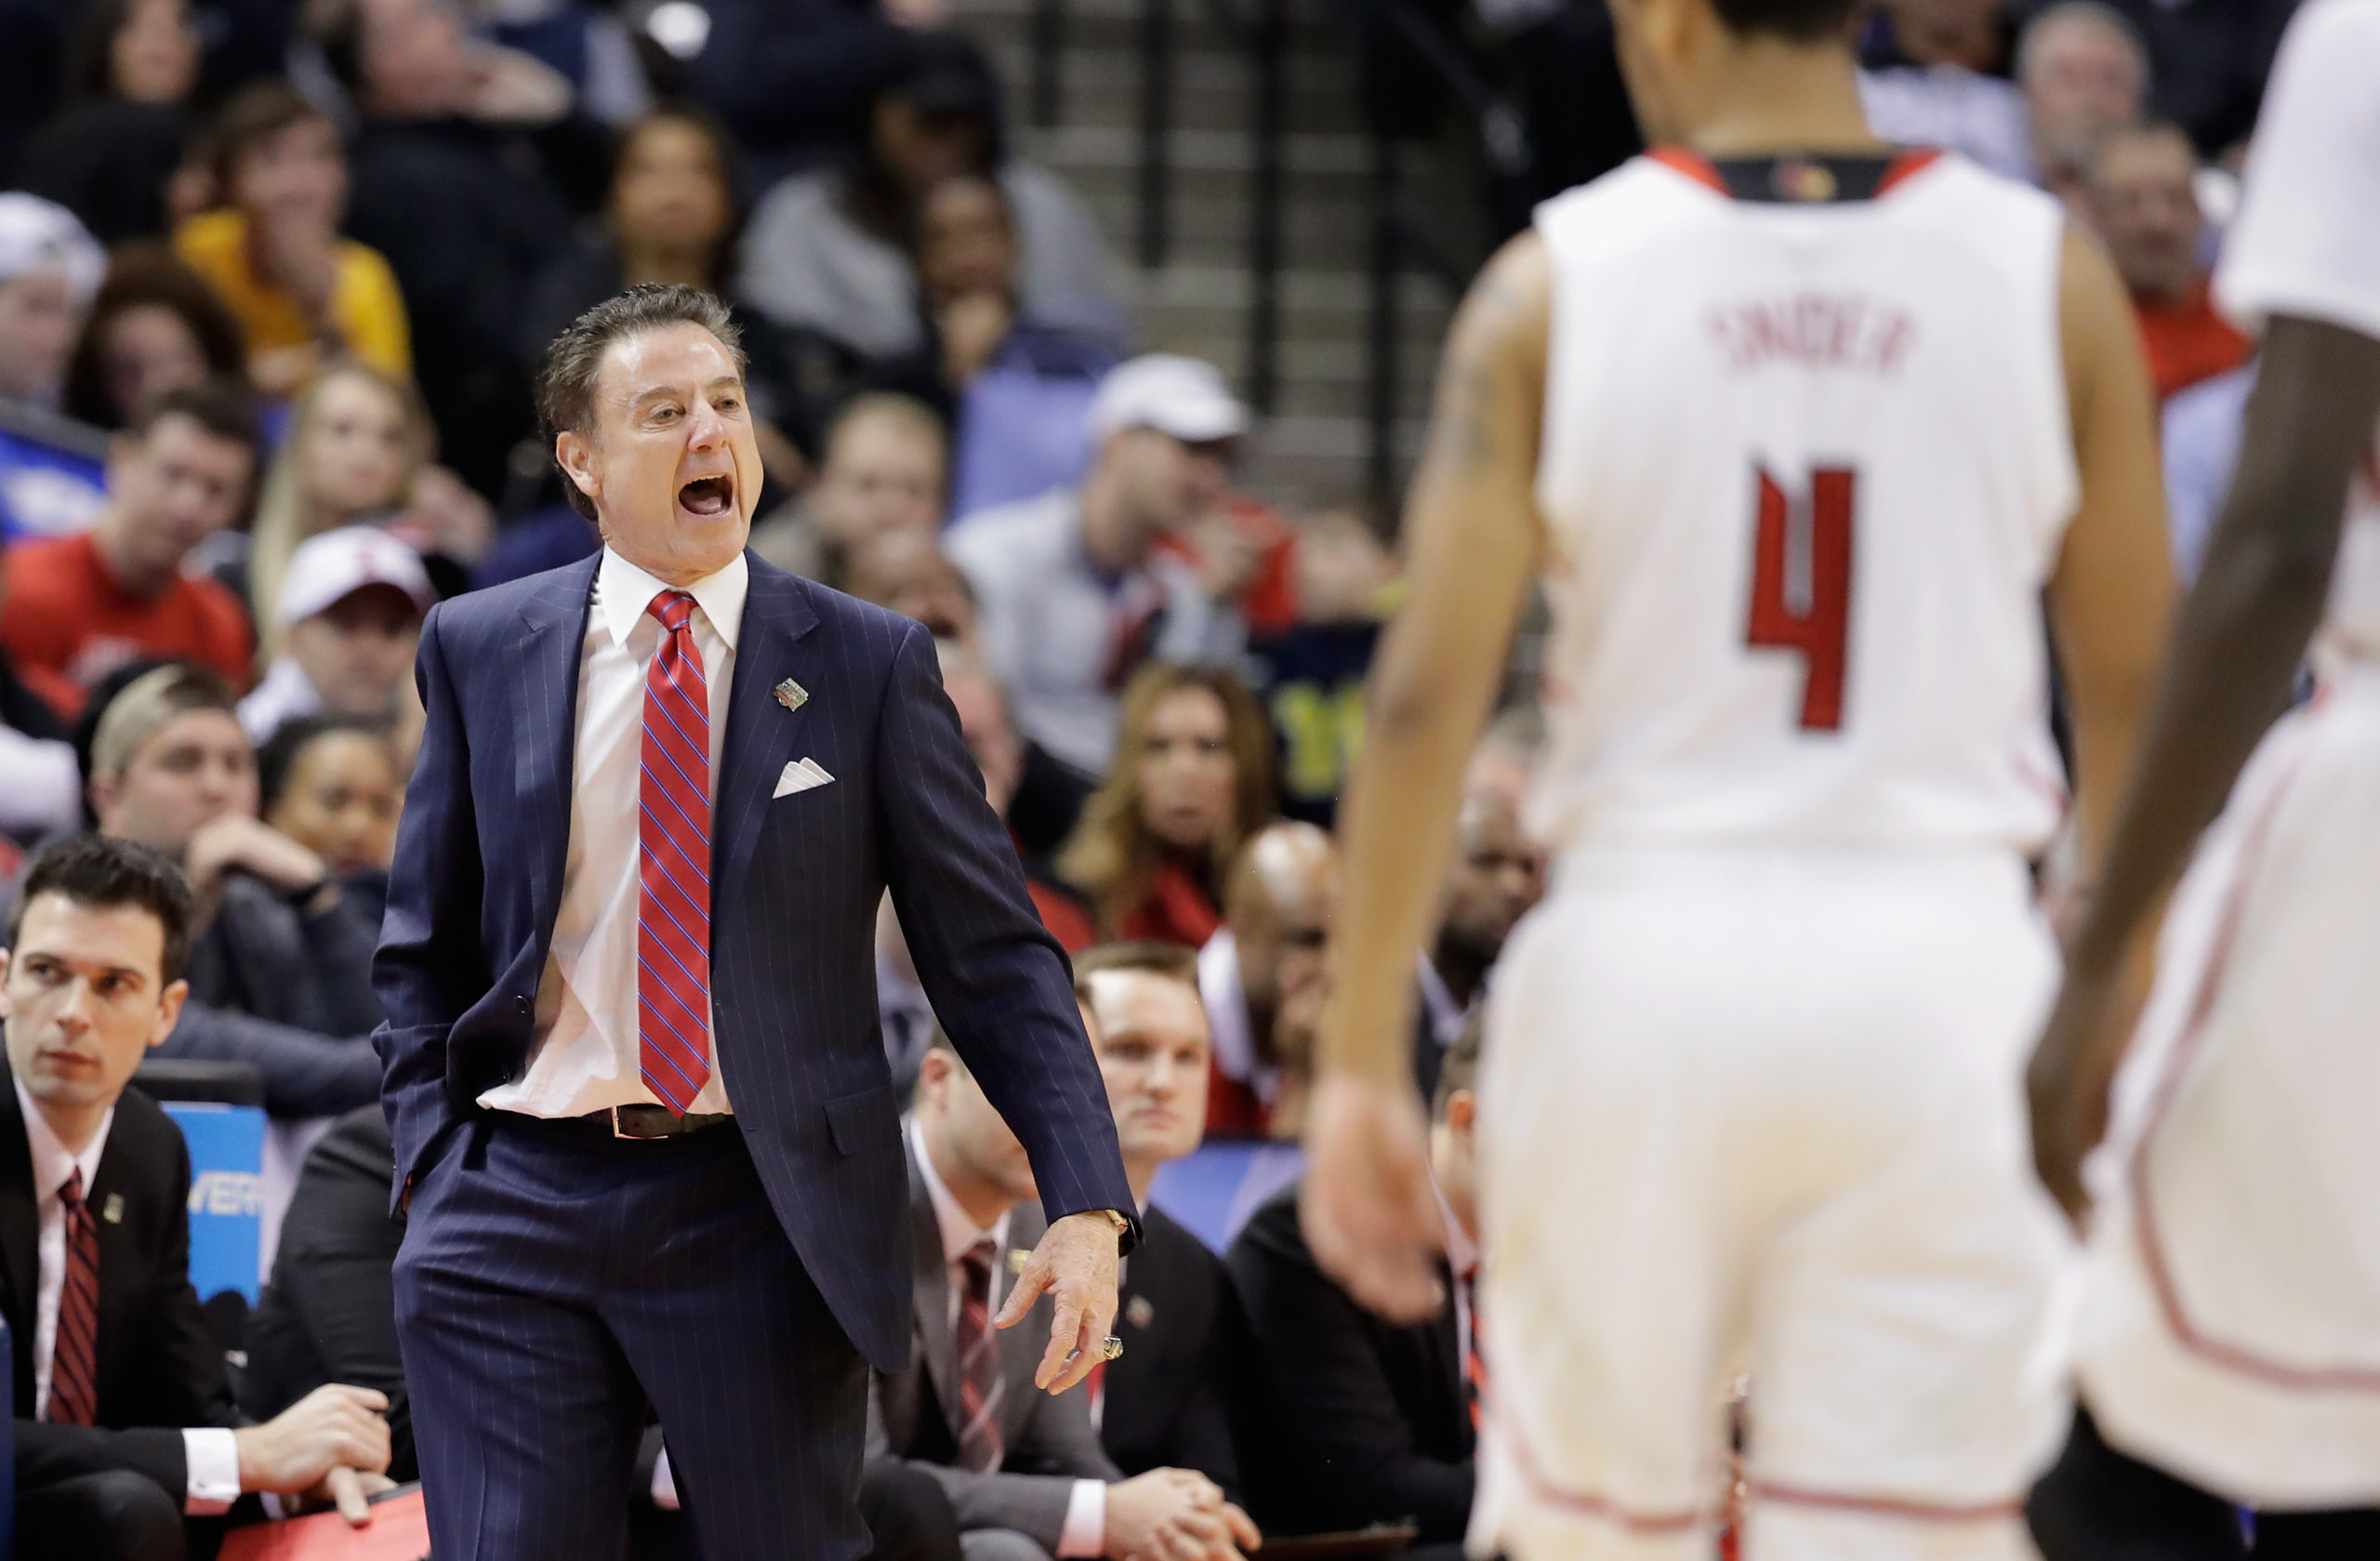 INDIANAPOLIS, IN - MARCH 19: Head coach Rick Pitino of the Louisville Cardinals reacts as Quentin Snider #4 looks on against the Michigan Wolverines in the first half during the second round of the 2017 NCAA Men's Basketball Tournament at the Bankers Life Fieldhouse on March 19, 2017 in Indianapolis, Indiana. Andy Lyons/Getty Images